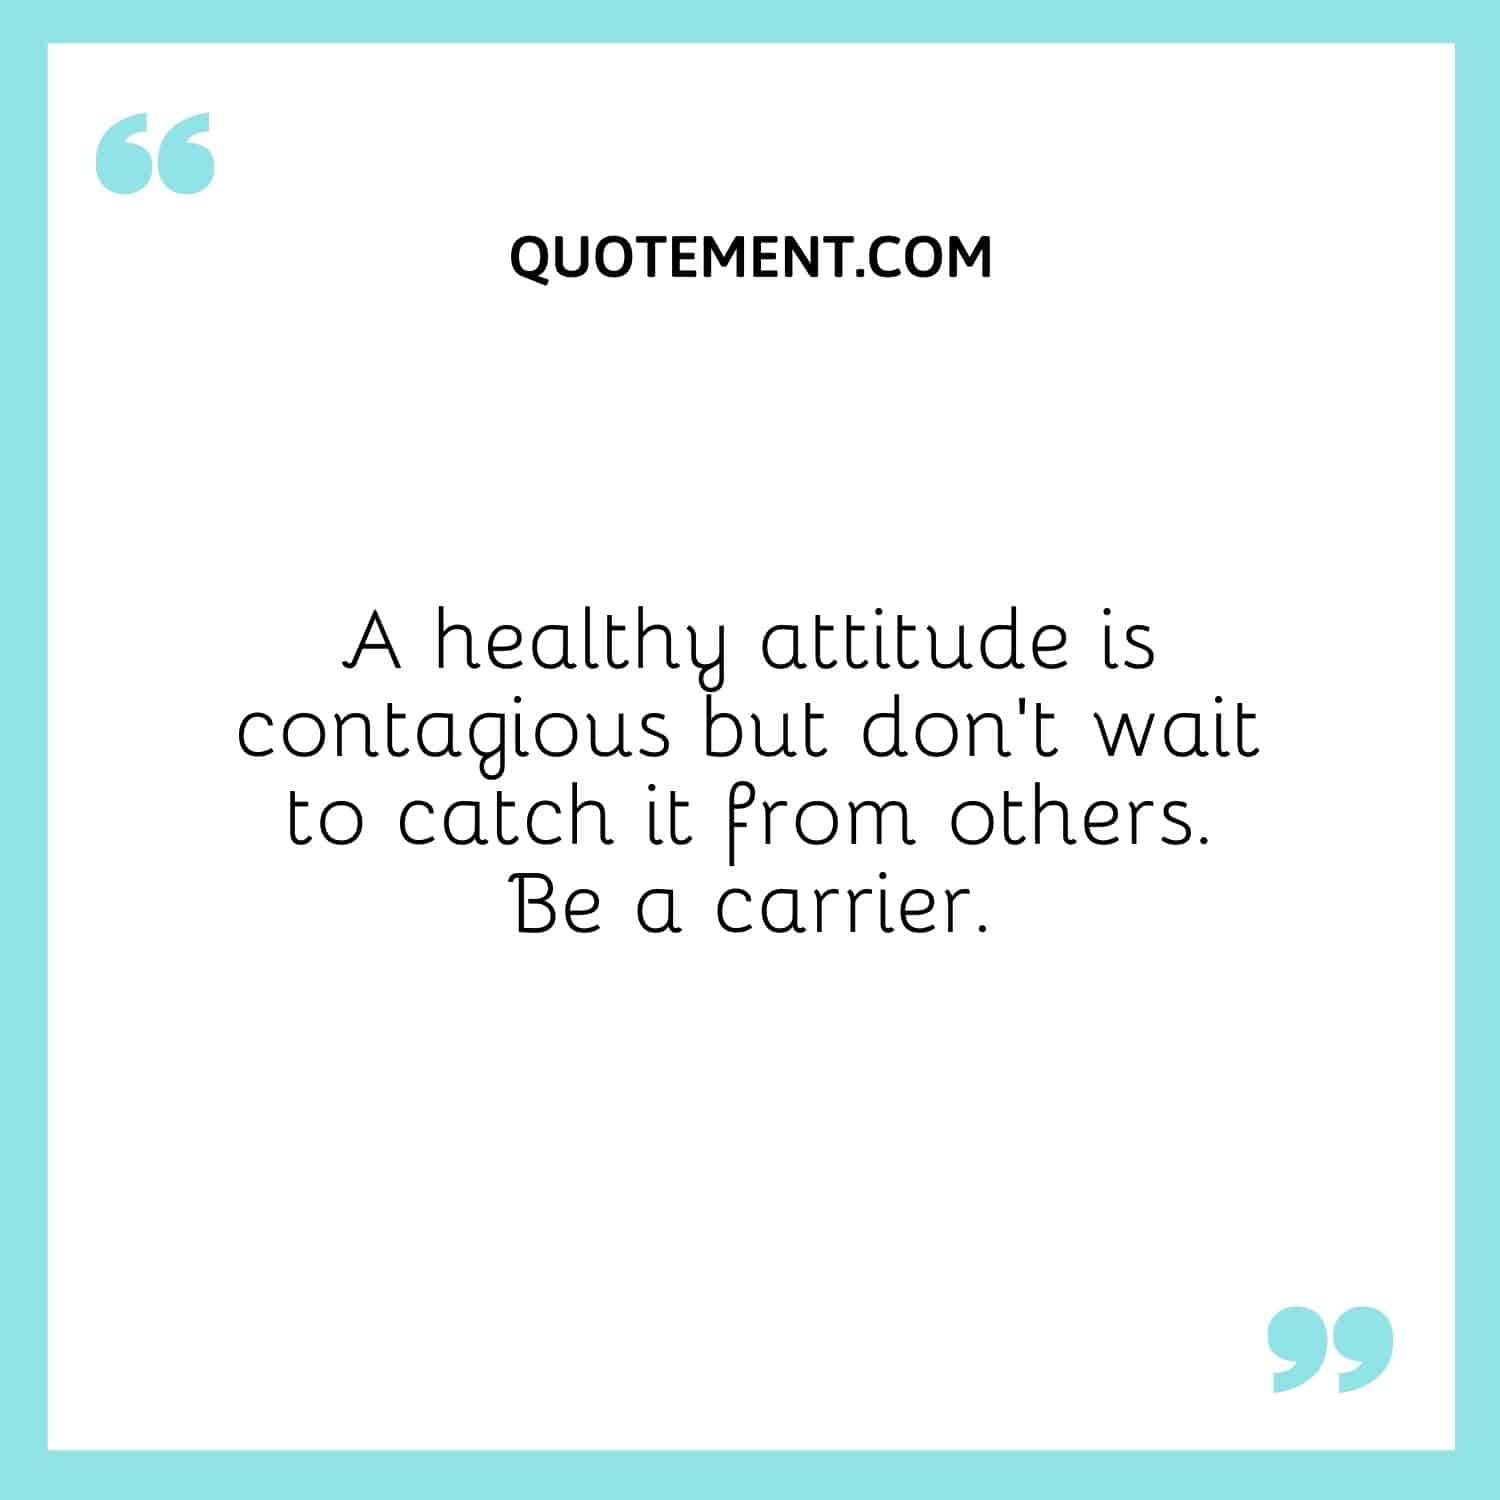 A healthy attitude is contagious but don’t wait to catch it from others. Be a carrier.